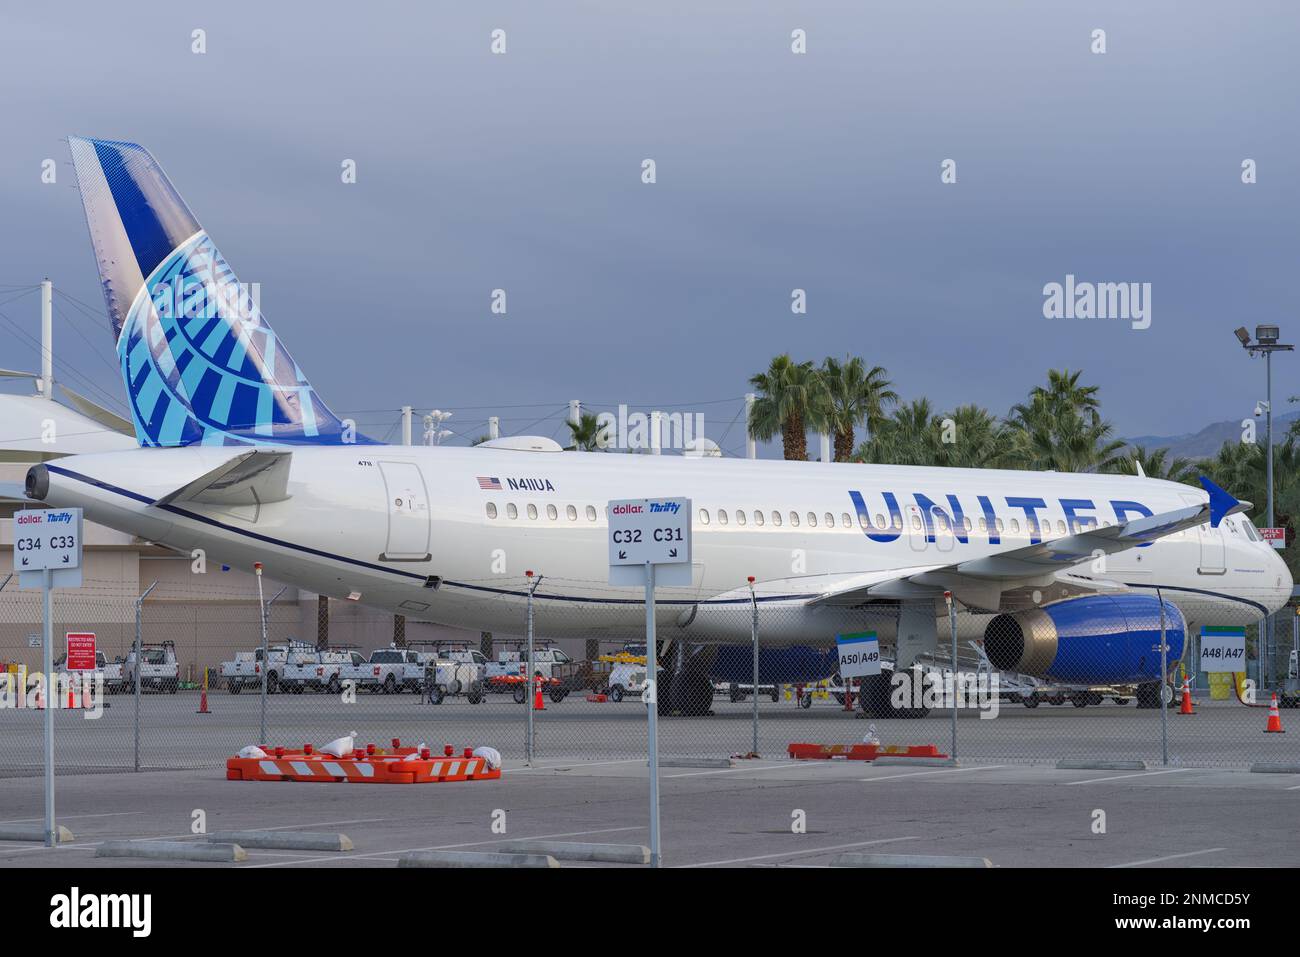 Palm Springs International Airport. United Airlines Airbus A320-232 aircraft with registration N411UA shown parked. Stock Photo